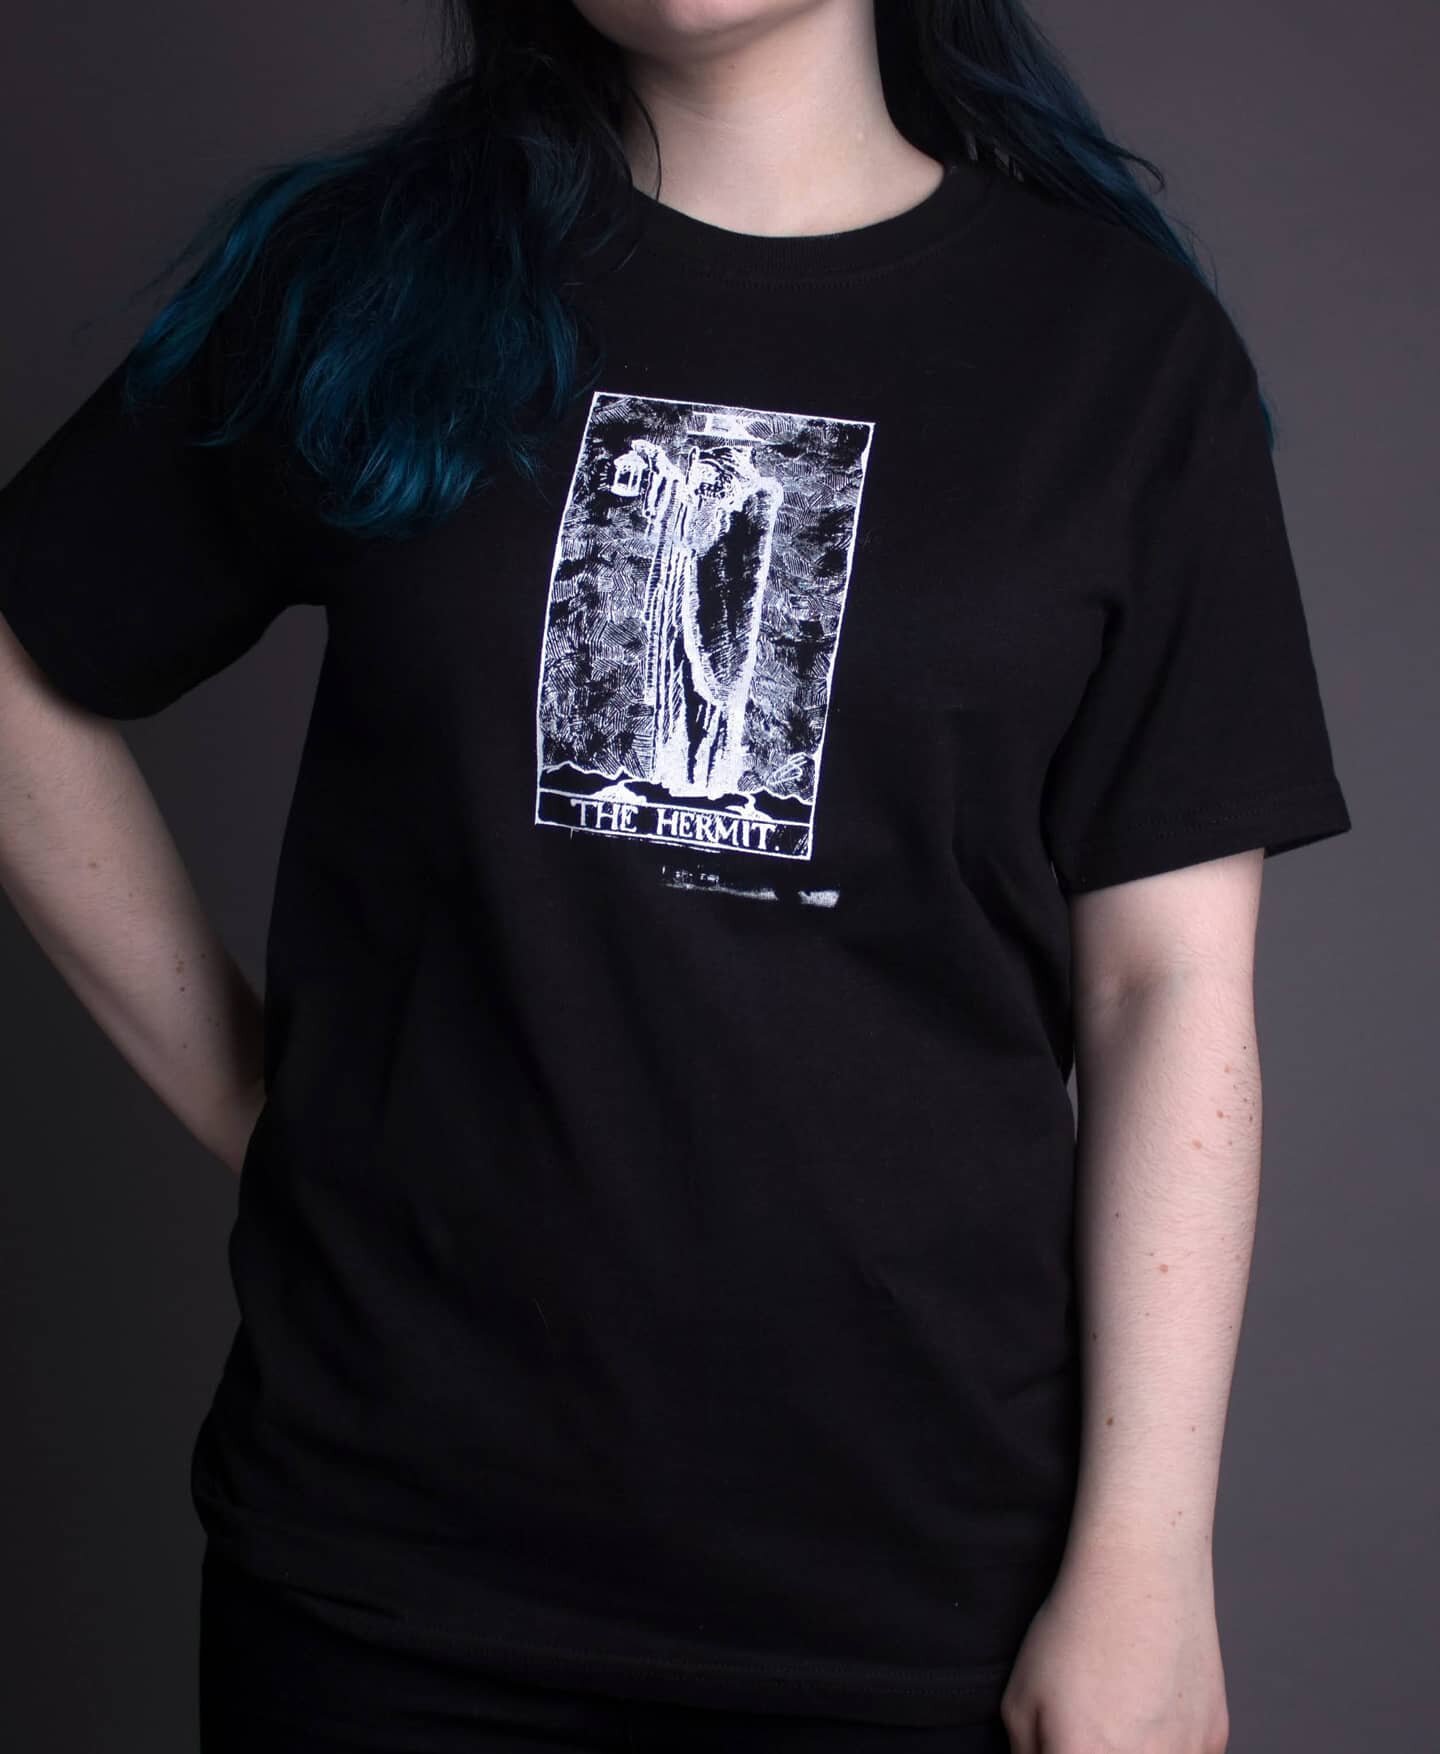 Featuring The Hermit T-shirt! It's definitely been one of my best sellers since I released it 🖤 
Get your hands one one through my Etsy shop! Available in black and white.
Link in bio 🔮
📷: @nadialovejadee_photography
.
.
.
#gothstyle #gothfashion 